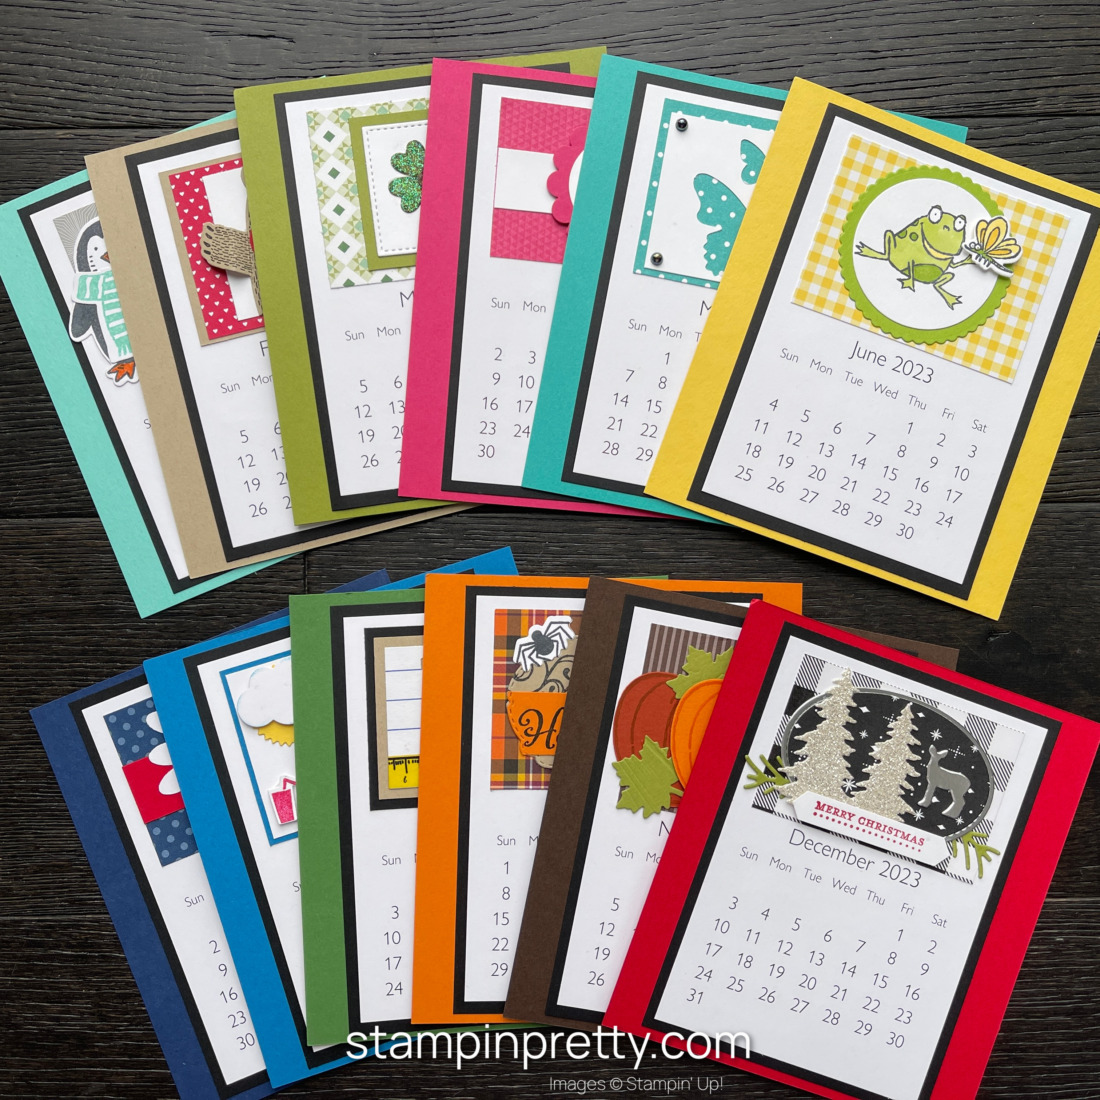 Create a CD Case Easel Calendar - Linda White's 2023 Version All 12 Months Fan View on Stampin' Pretty - Mary Fish